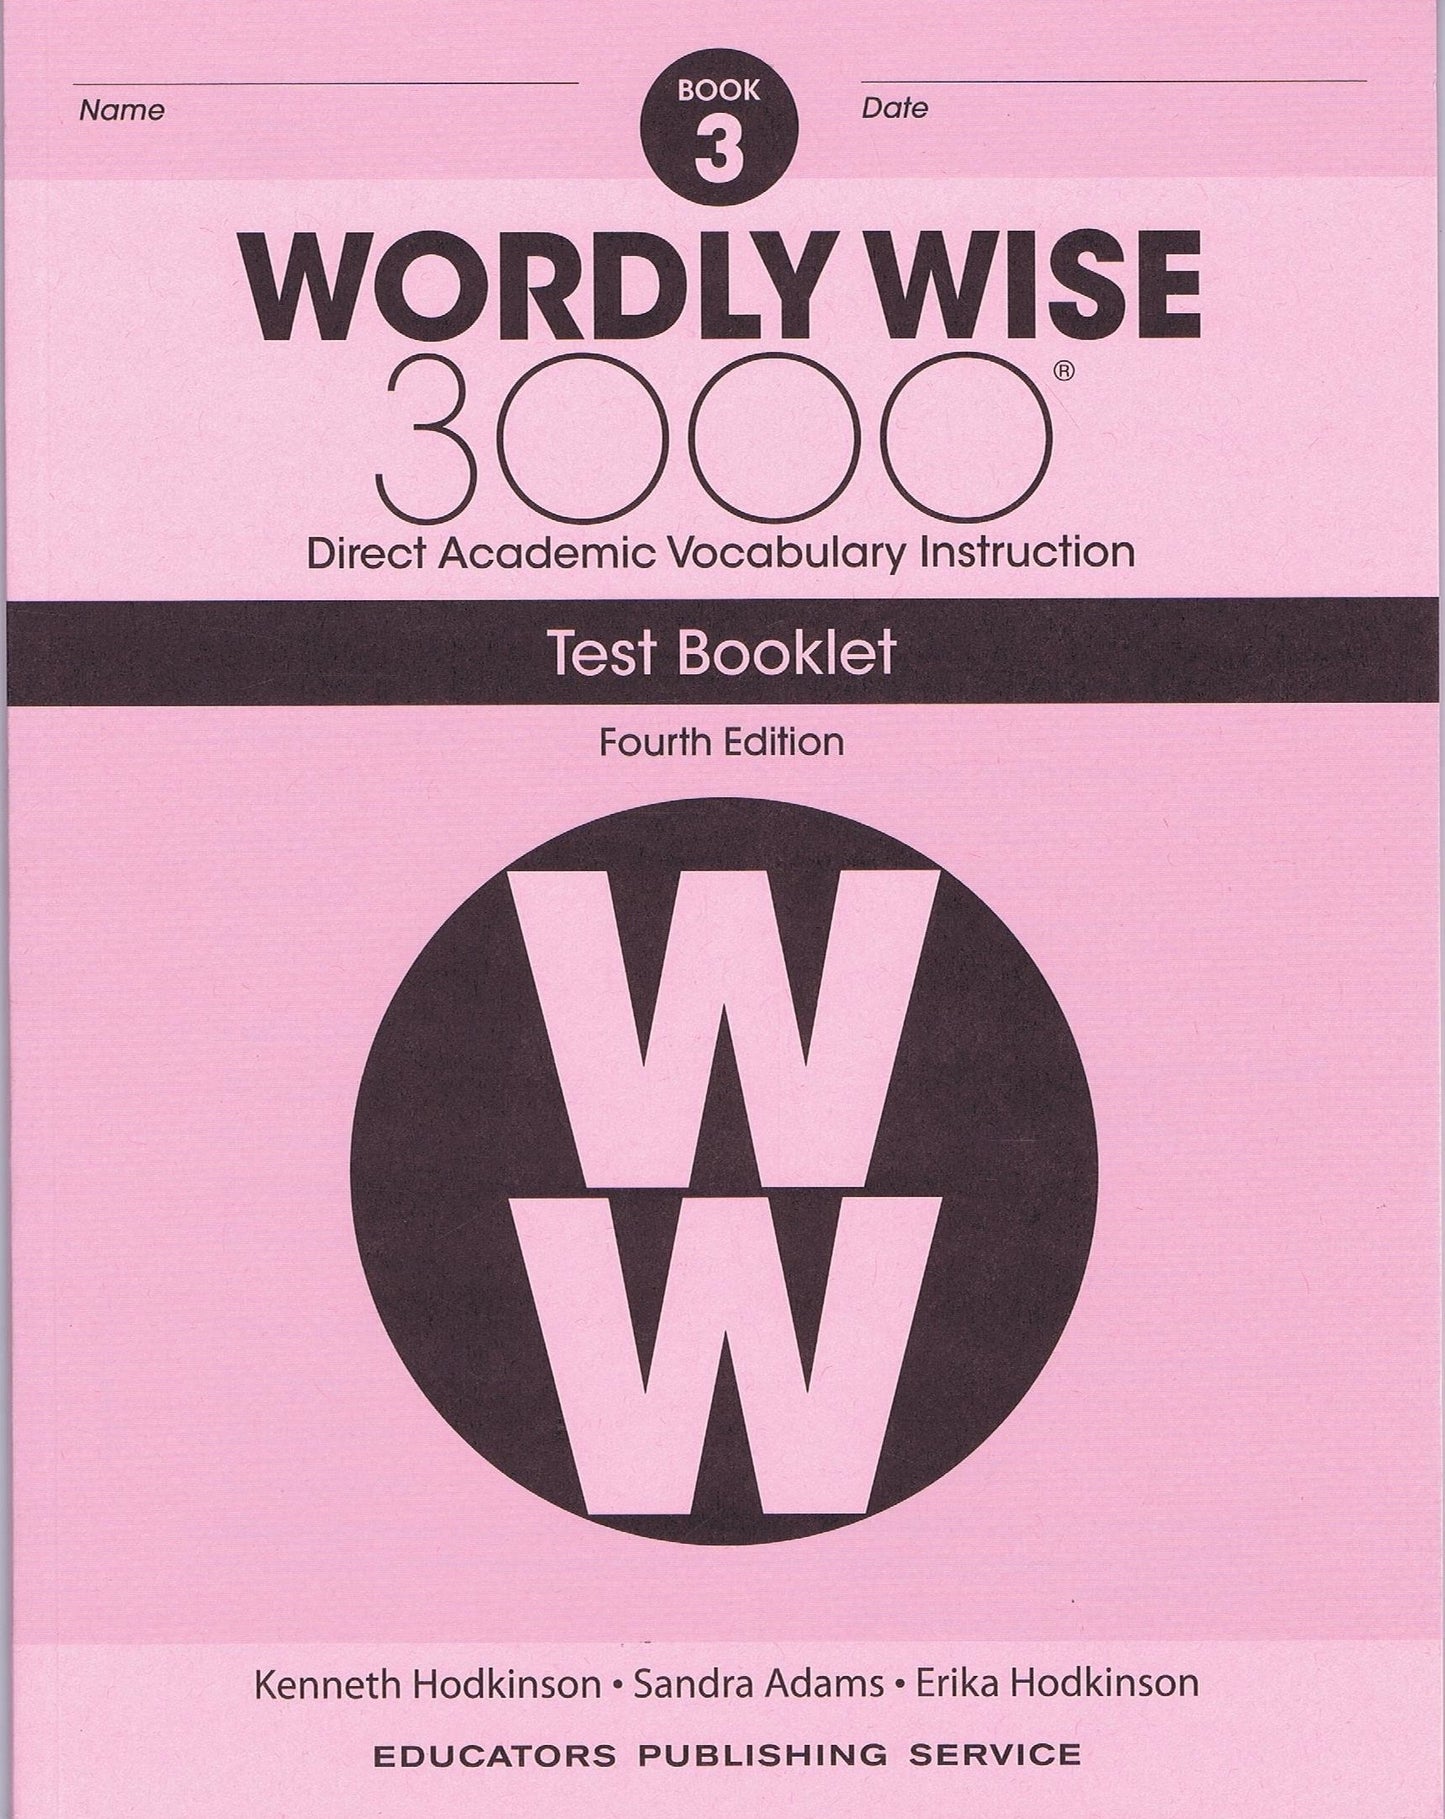 Wordly Wise 3000 (4th Edition) Test Booklet Book 3 (Gr. 3)